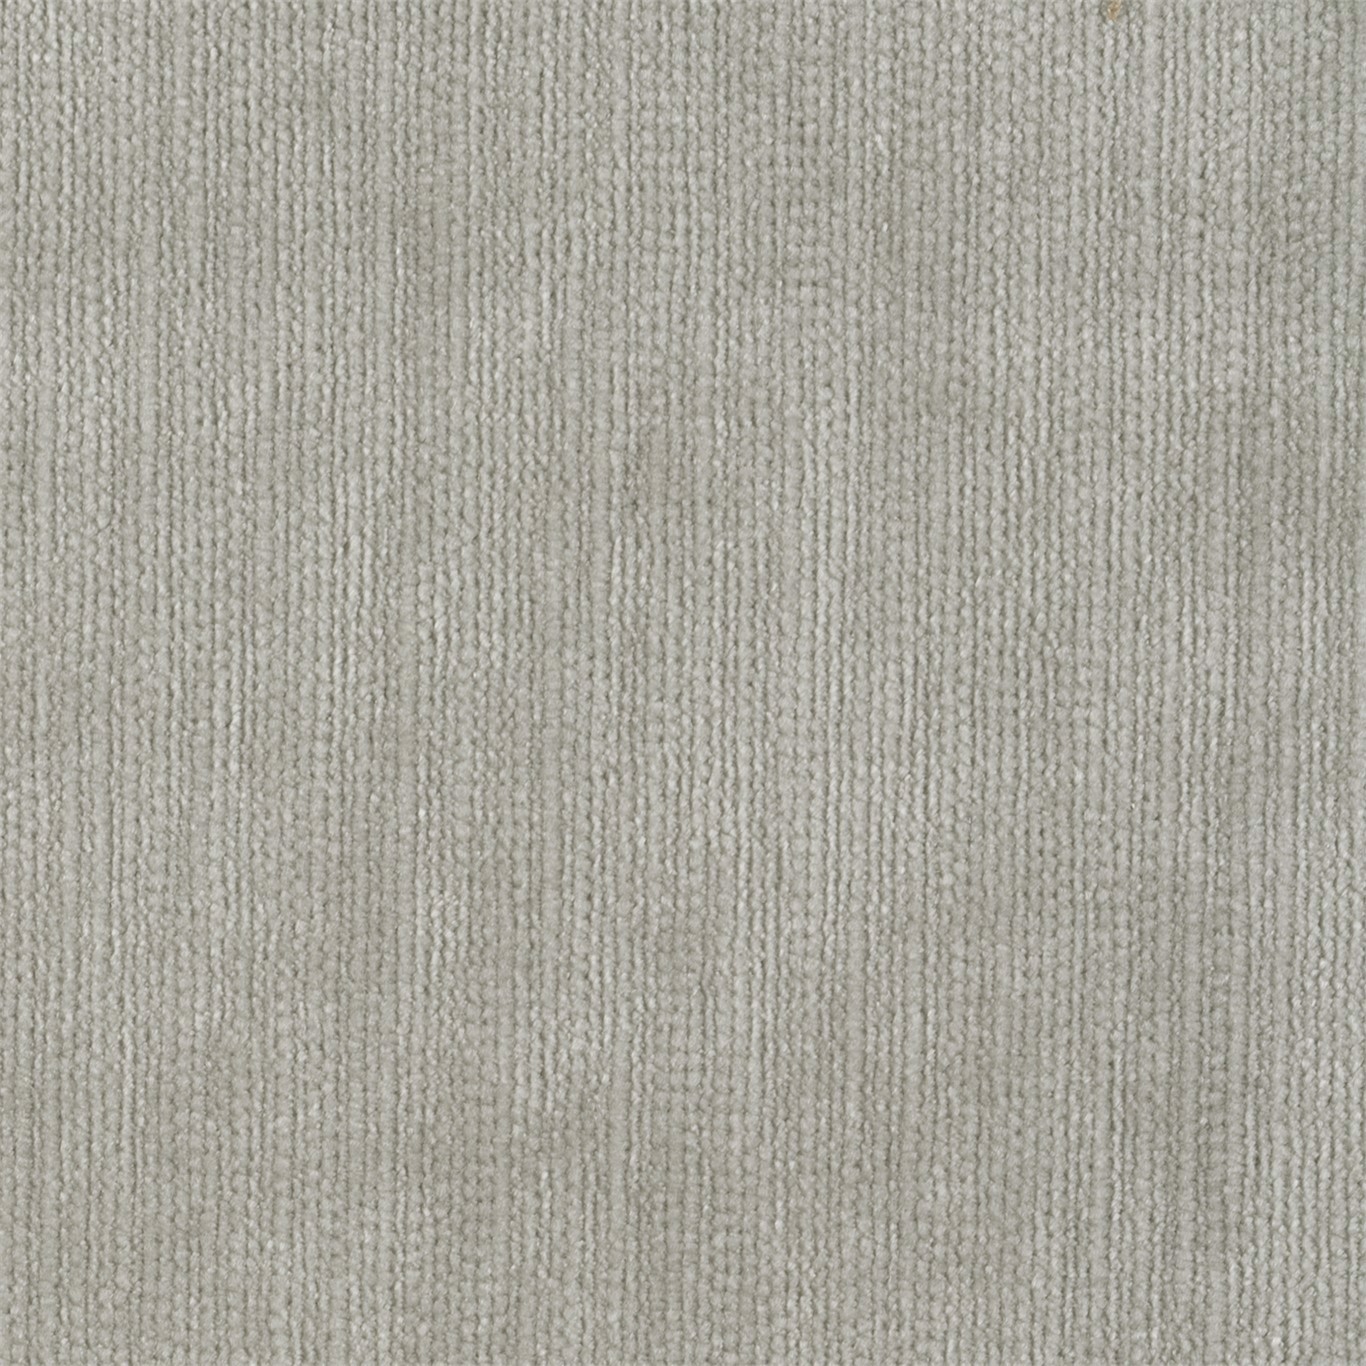 Momentum Velvets Silver Fabric by HAR